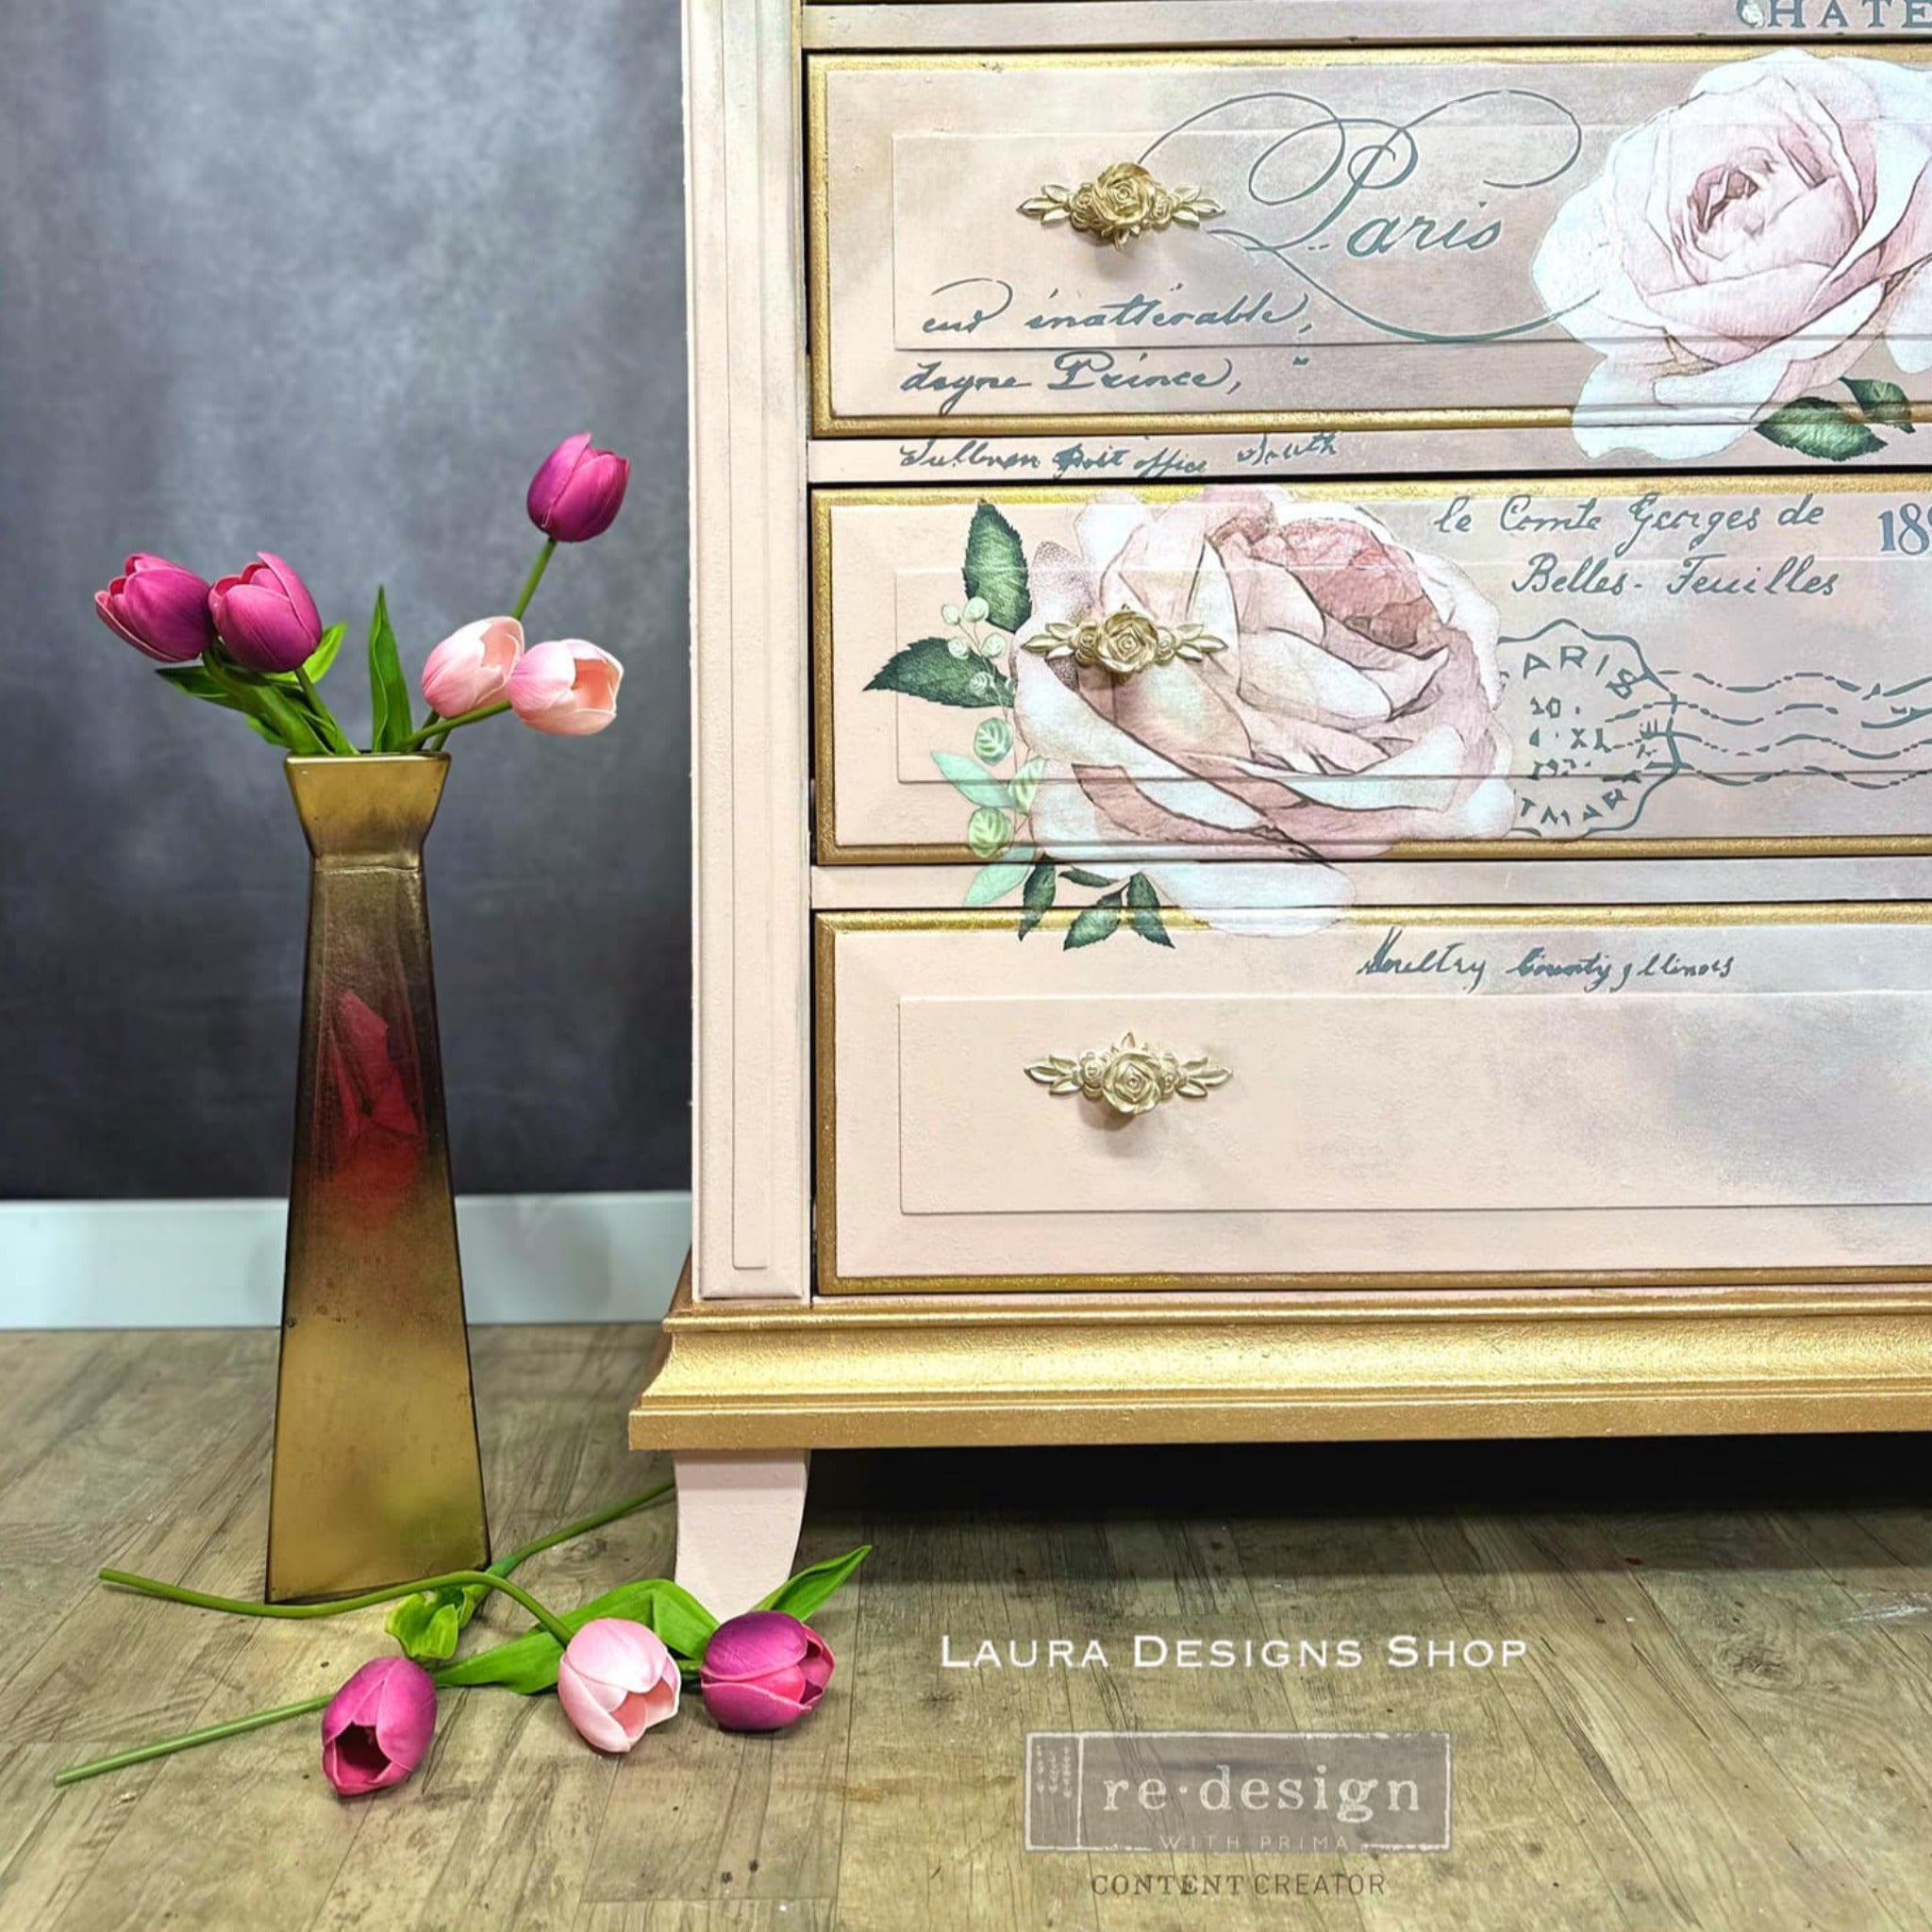 A close-up of a vintage dresser refurbished by Laura Designs Shop, a ReDesign with Prima Content Creator, is painted pale pink and gold accents and features the Chatellerault transfer on its drawers.